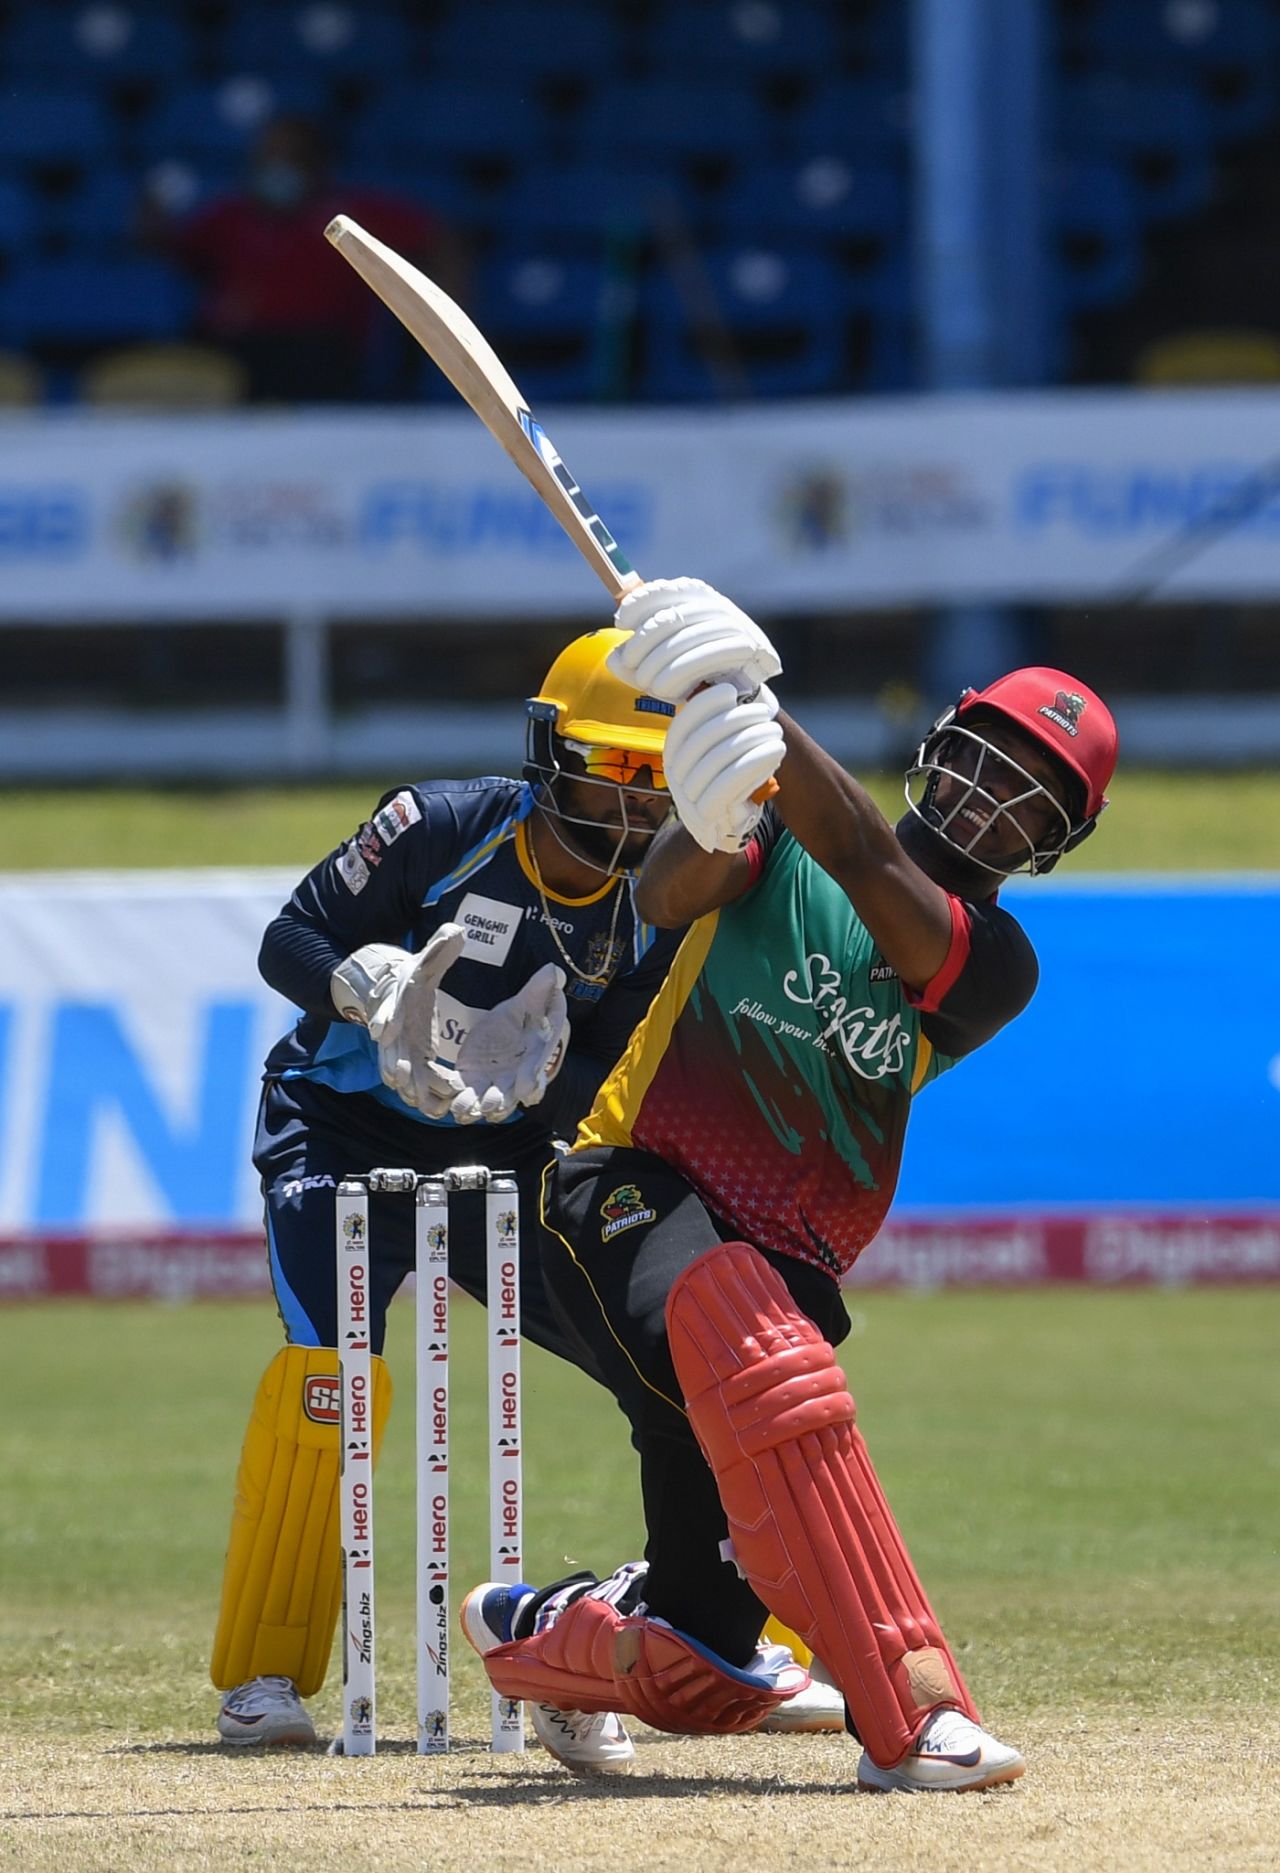 Evin Lewis sends one for six en route to his match-winning 89, Barbados Tridents v St Kitts & Nevis Patriots, Queen's Park Oval, CPL 2020, August 25, 2020